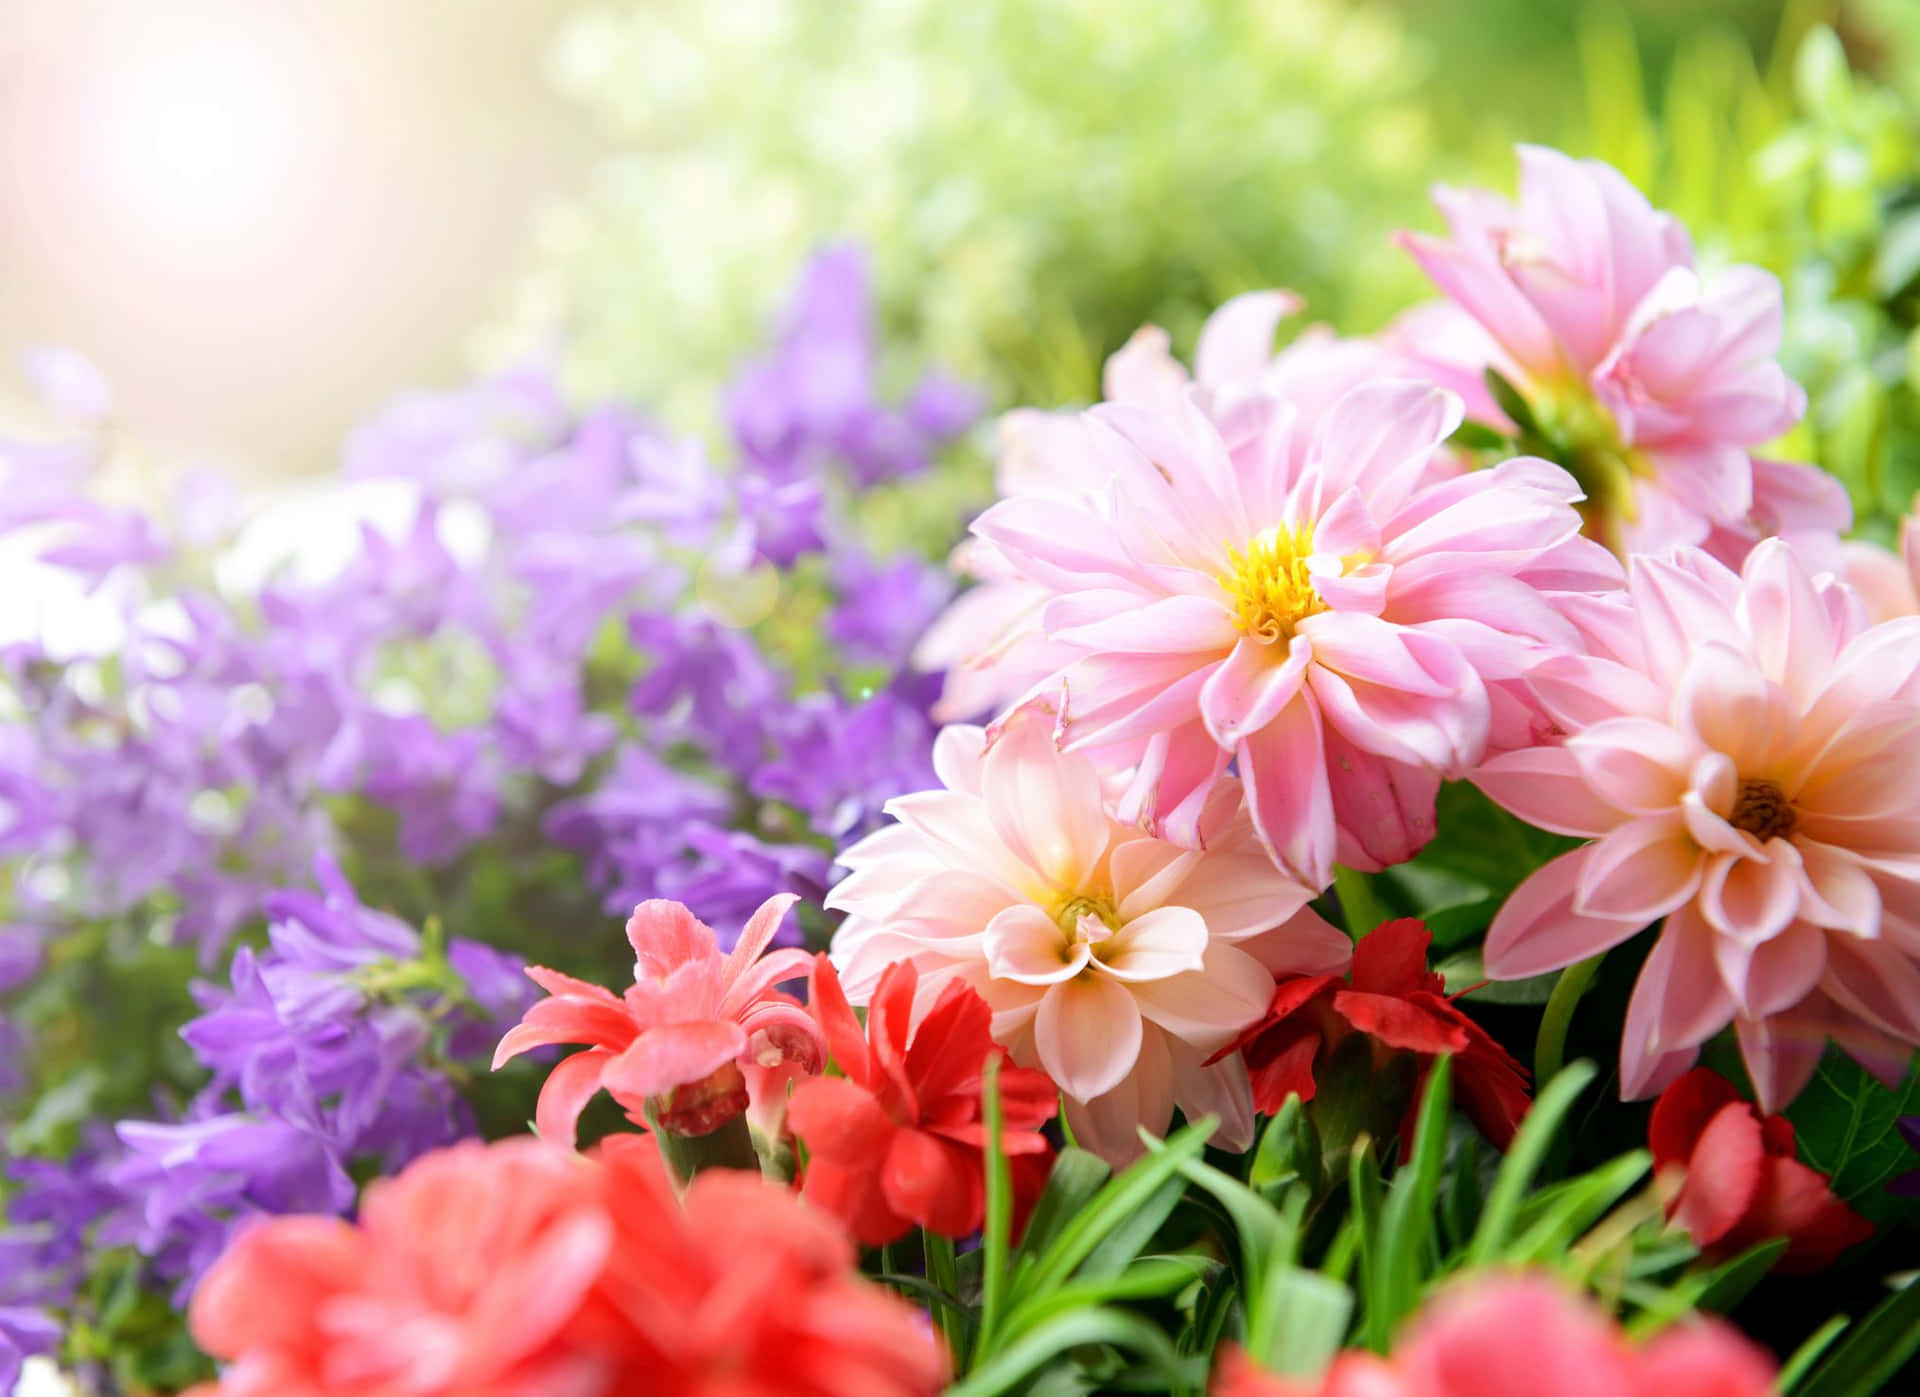 Flowers Pictures Wallpaper